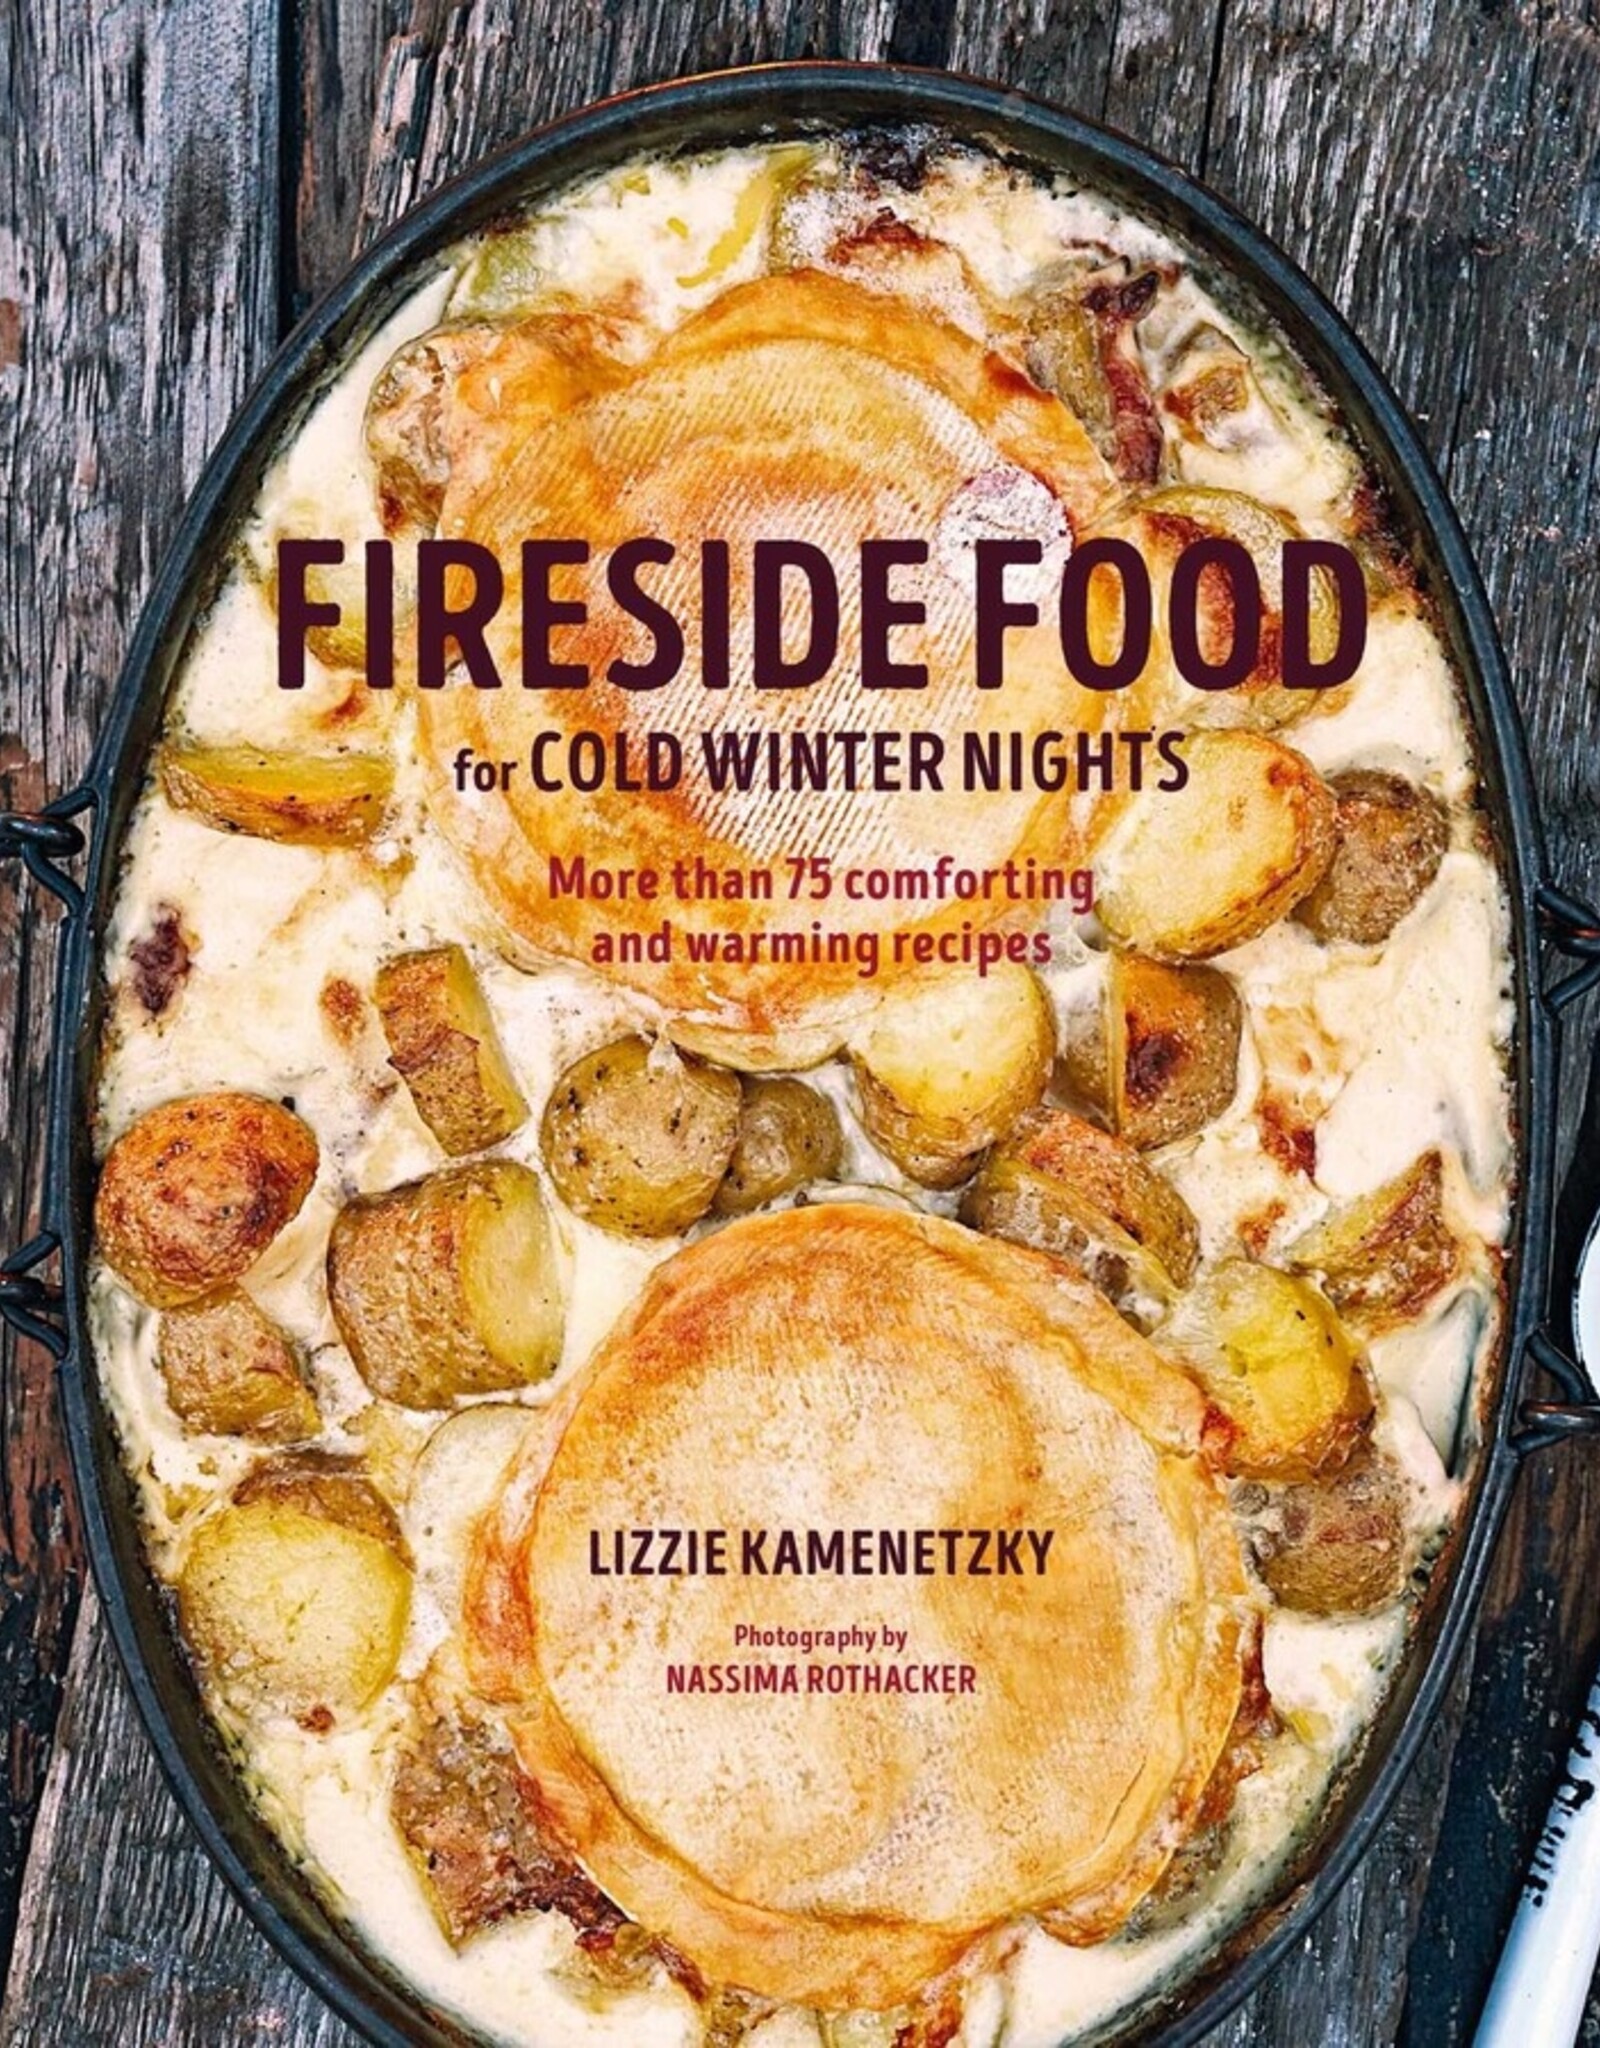 Simon & Schuster Fireside Food for Cold Winter Nights